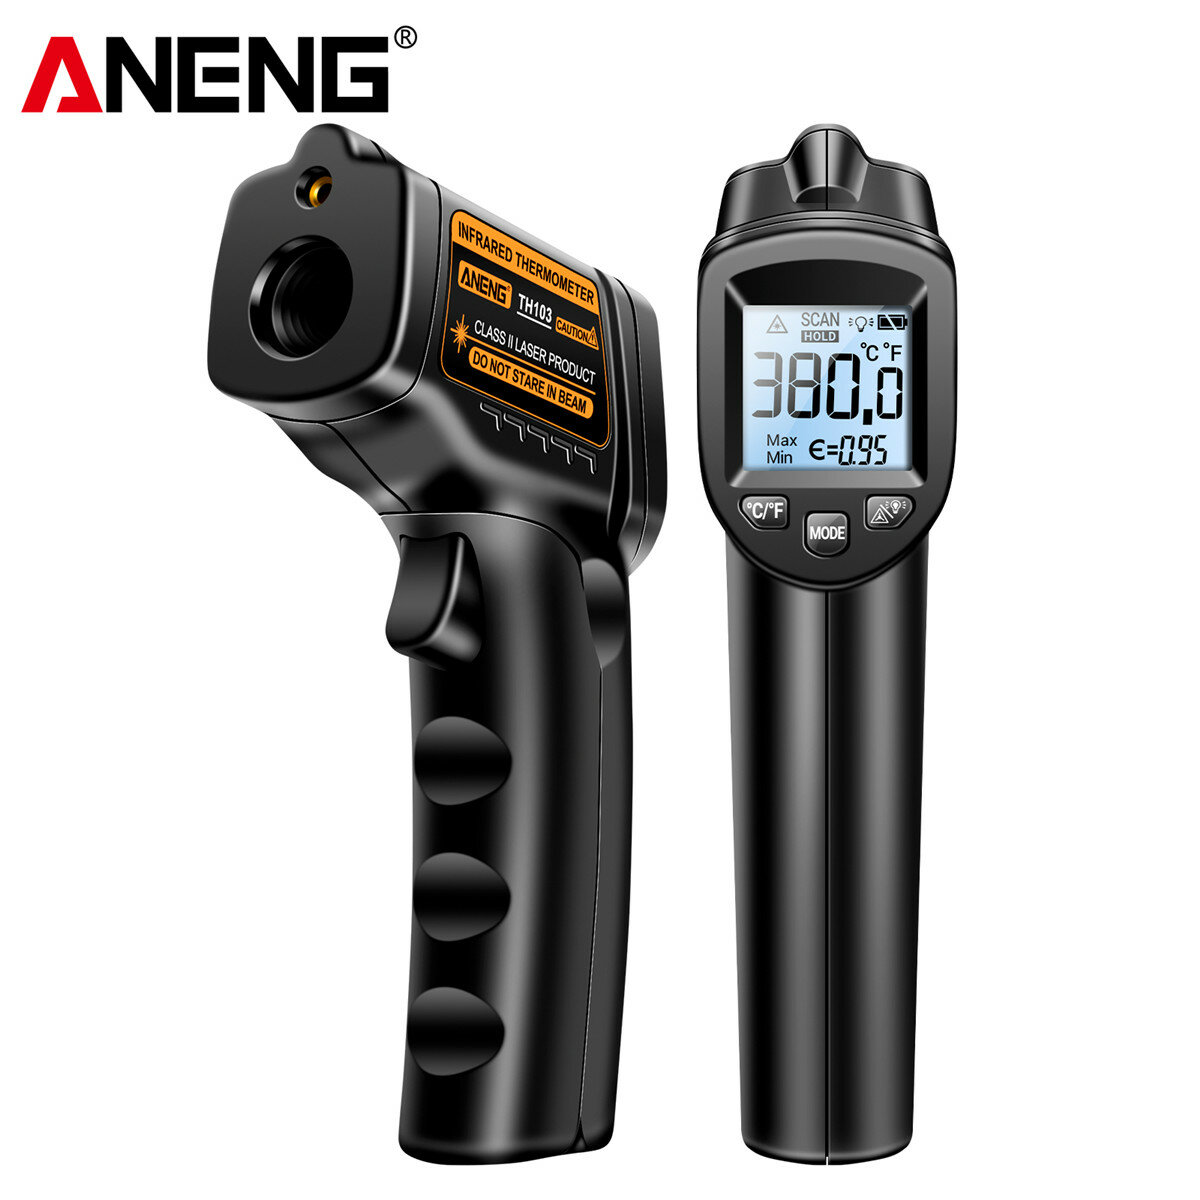 best price,aneng,th103,thermometer,pyrometer,discount